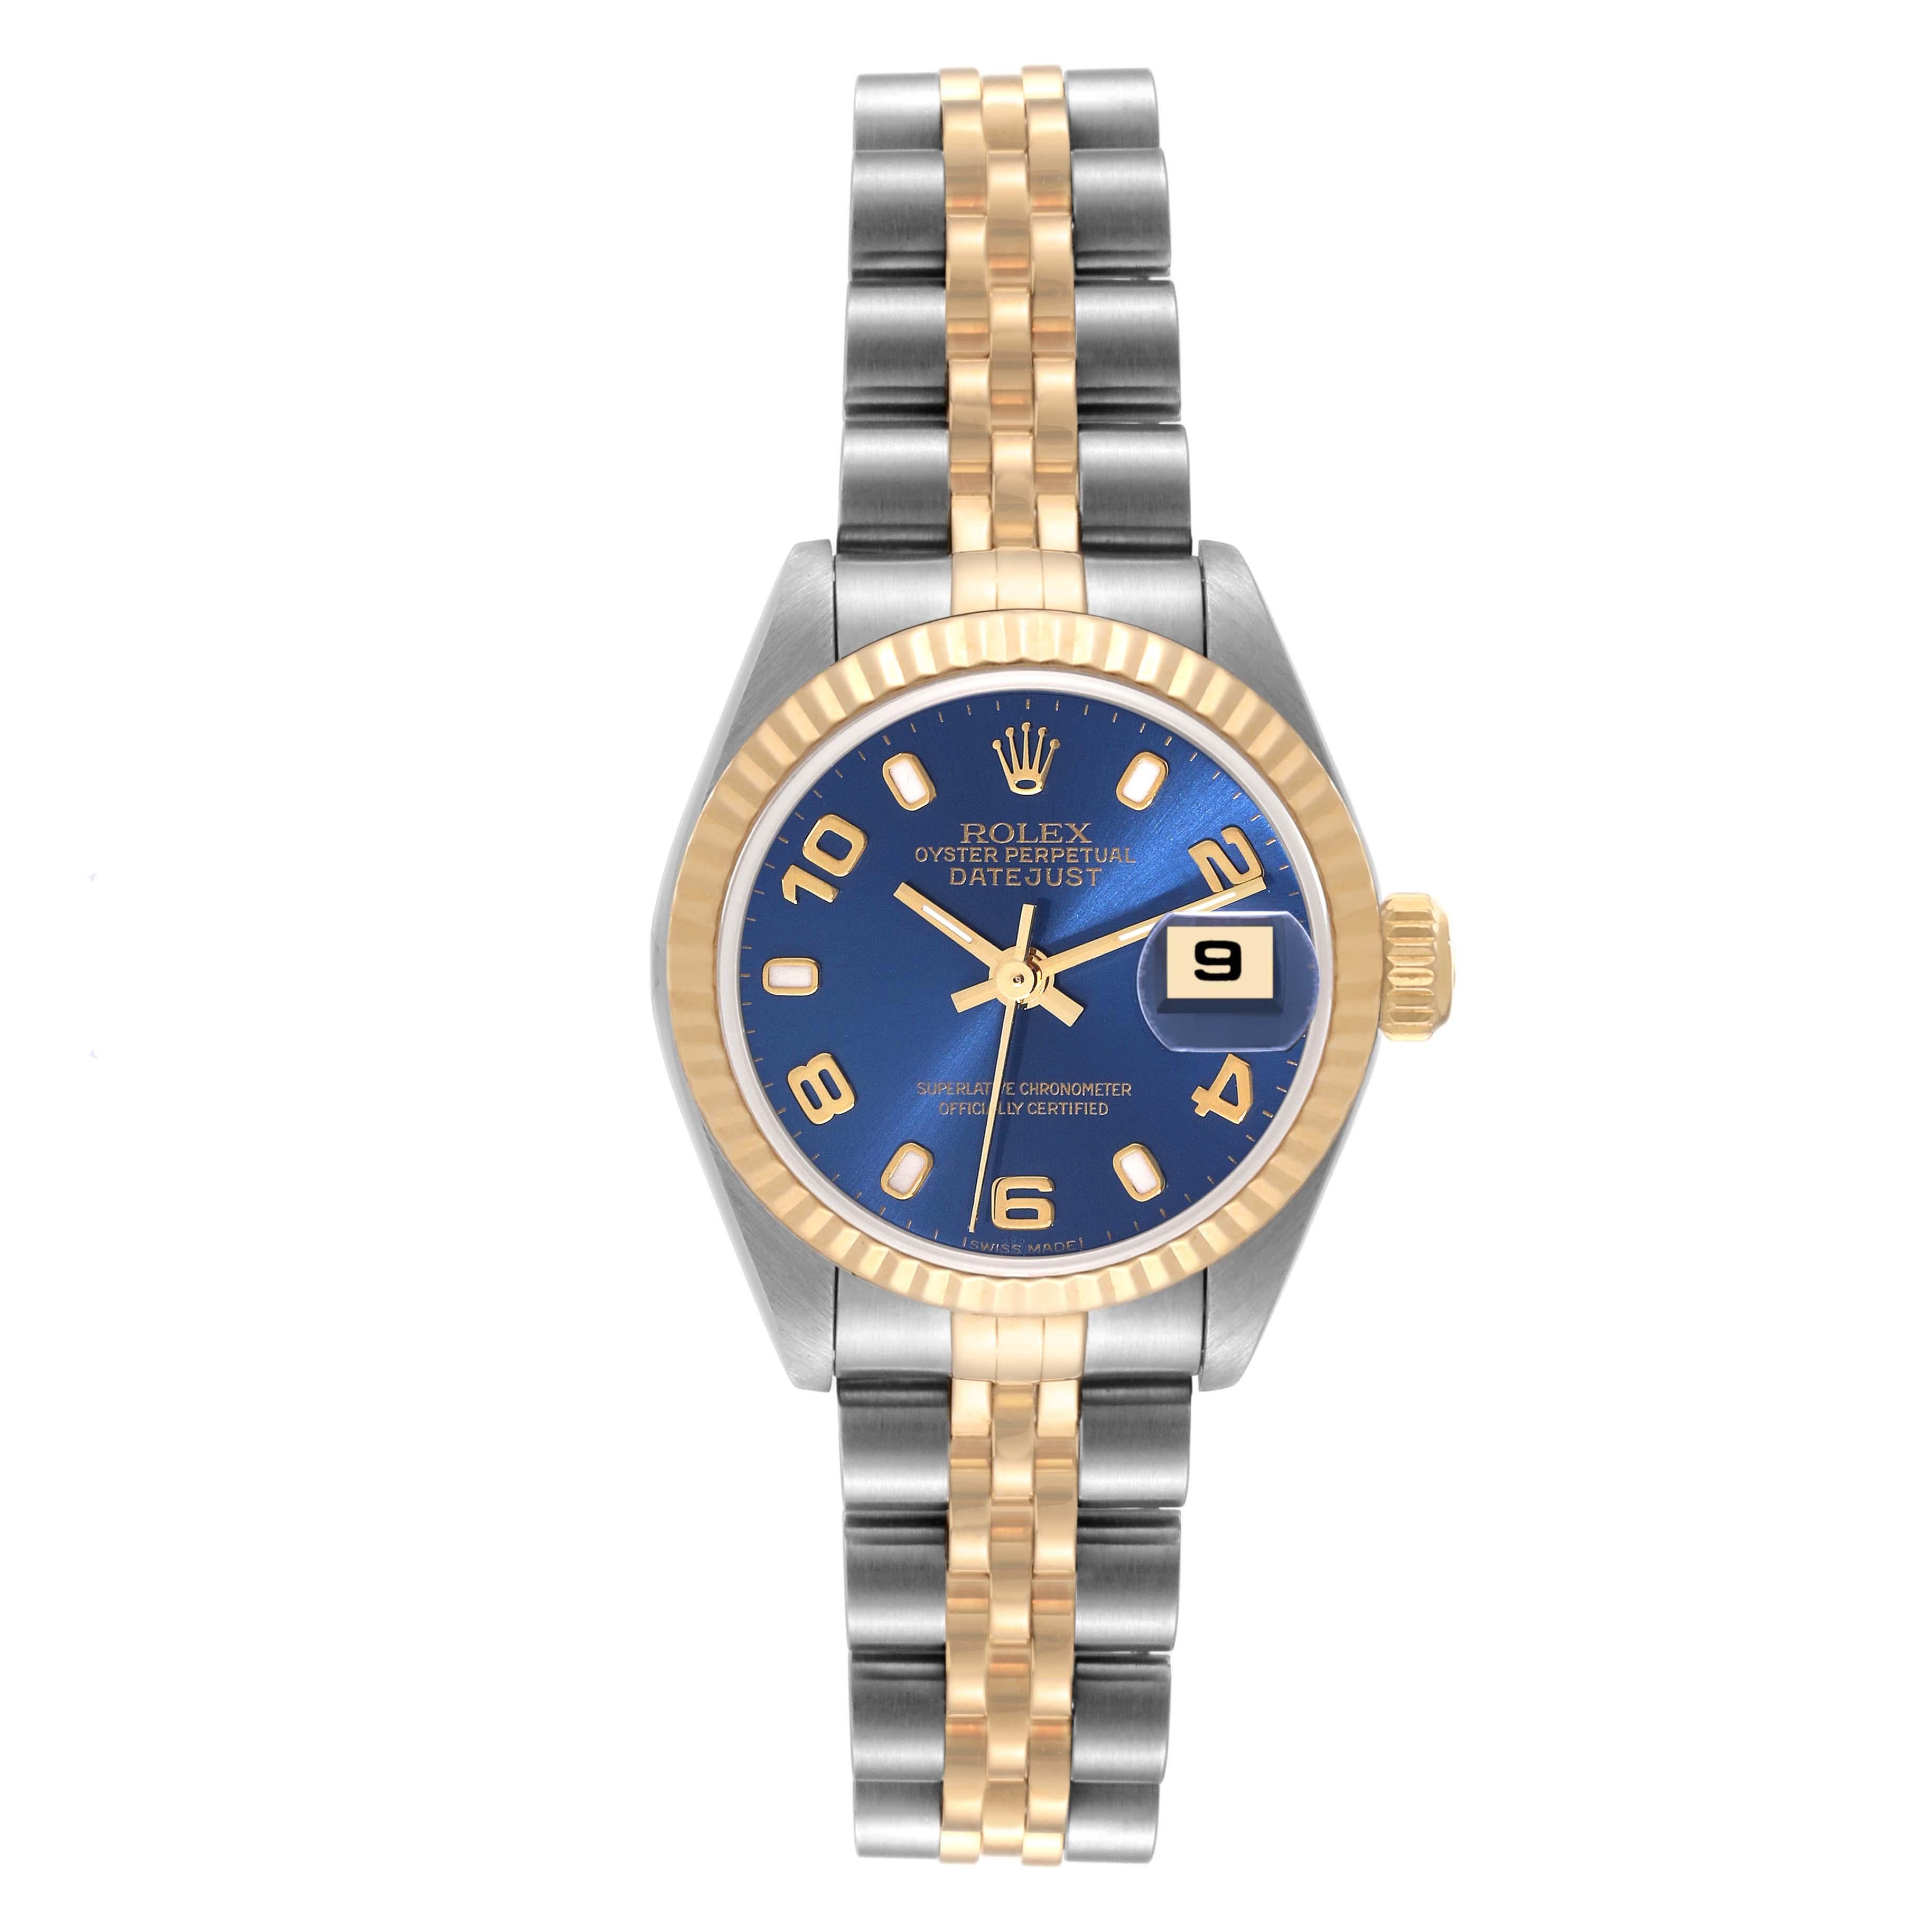 Rolex Datejust Steel Yellow Gold Blue Dial Ladies Watch 79173. Officially certified chronometer self-winding movement. Stainless steel oyster case 26.0 mm in diameter. Rolex logo on a 18K yellow gold crown. 18k yellow gold fluted bezel. Scratch